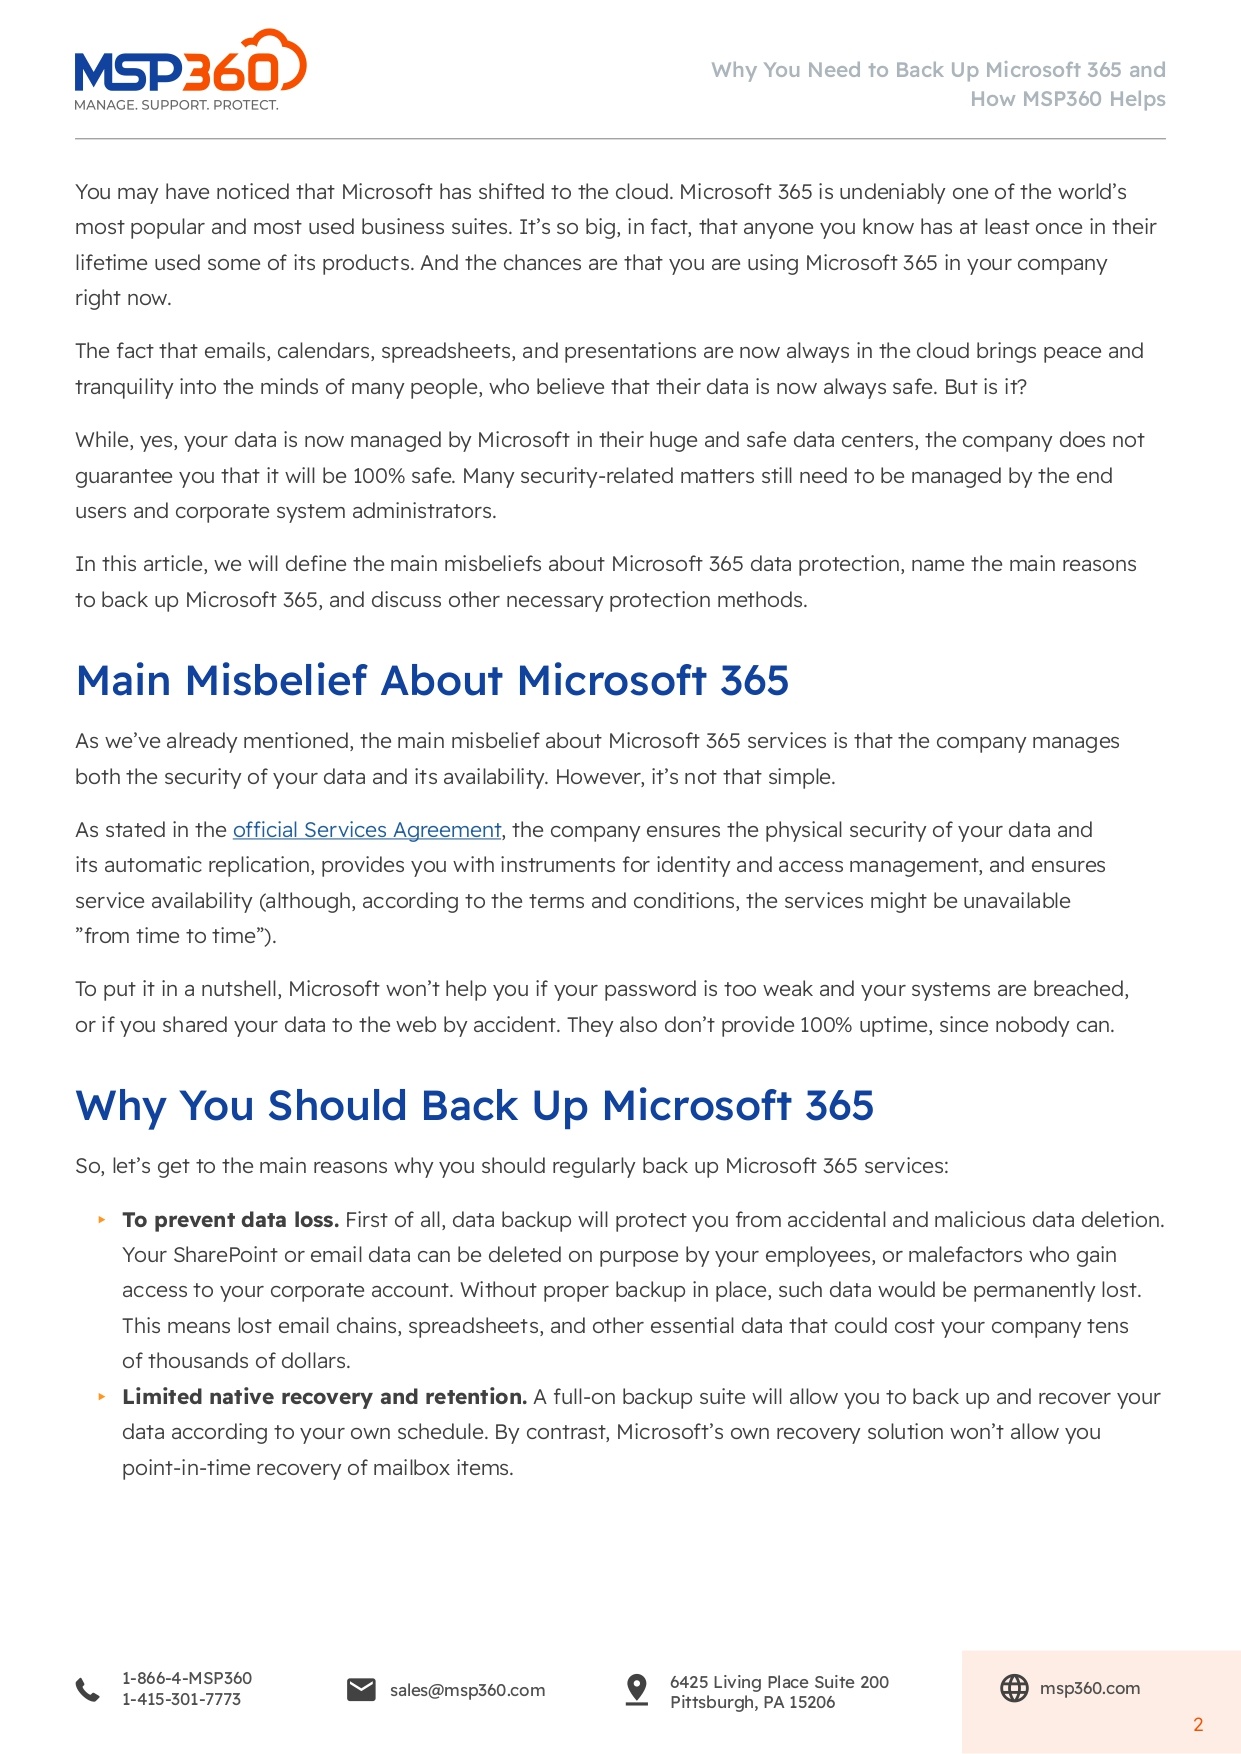 Why You Need to Back Up Microsoft 365 and How MSP360 Helps new_page-0002